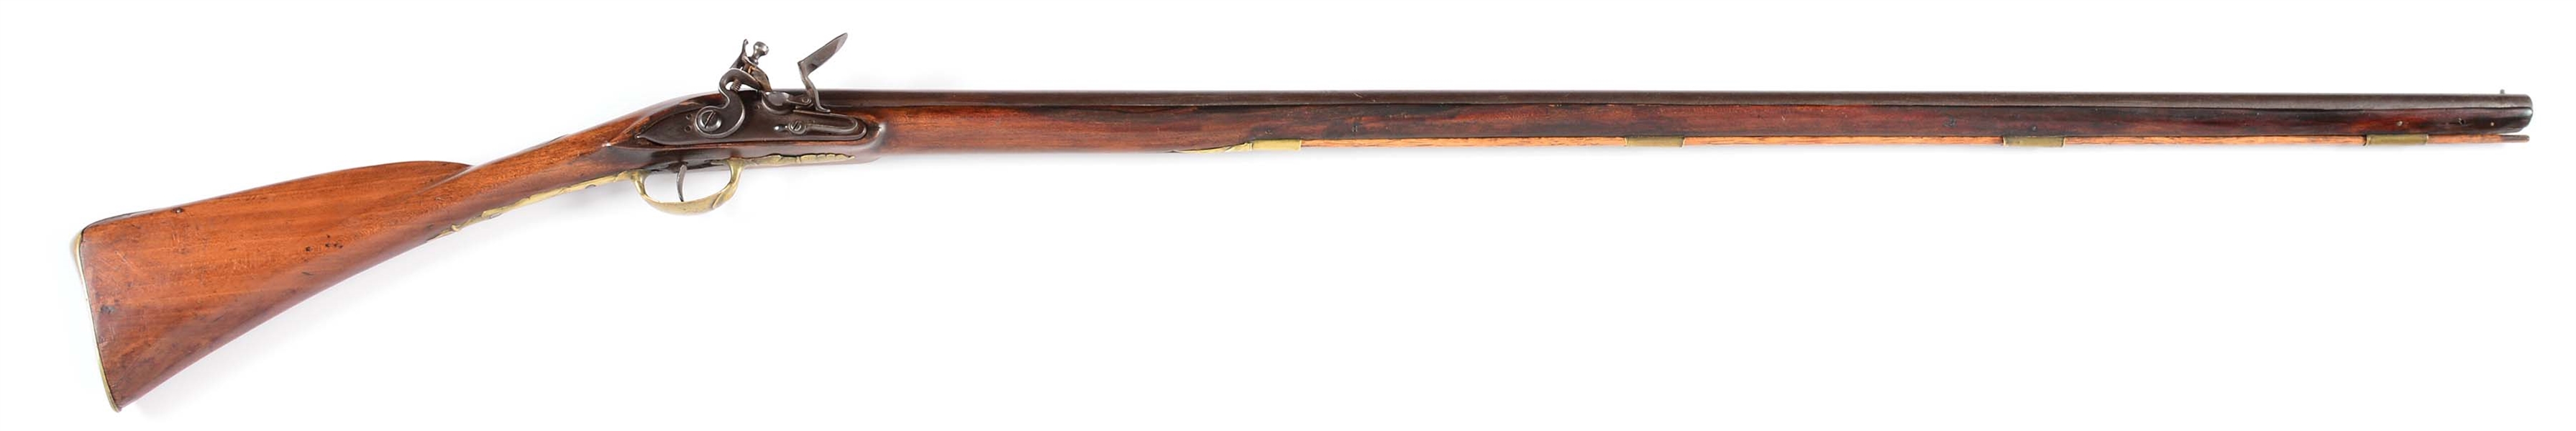 (A) 1771 DATED NEW ENGLAND FLINTLOCK FOWLER ATTRIBUTED TO JOHNSON.